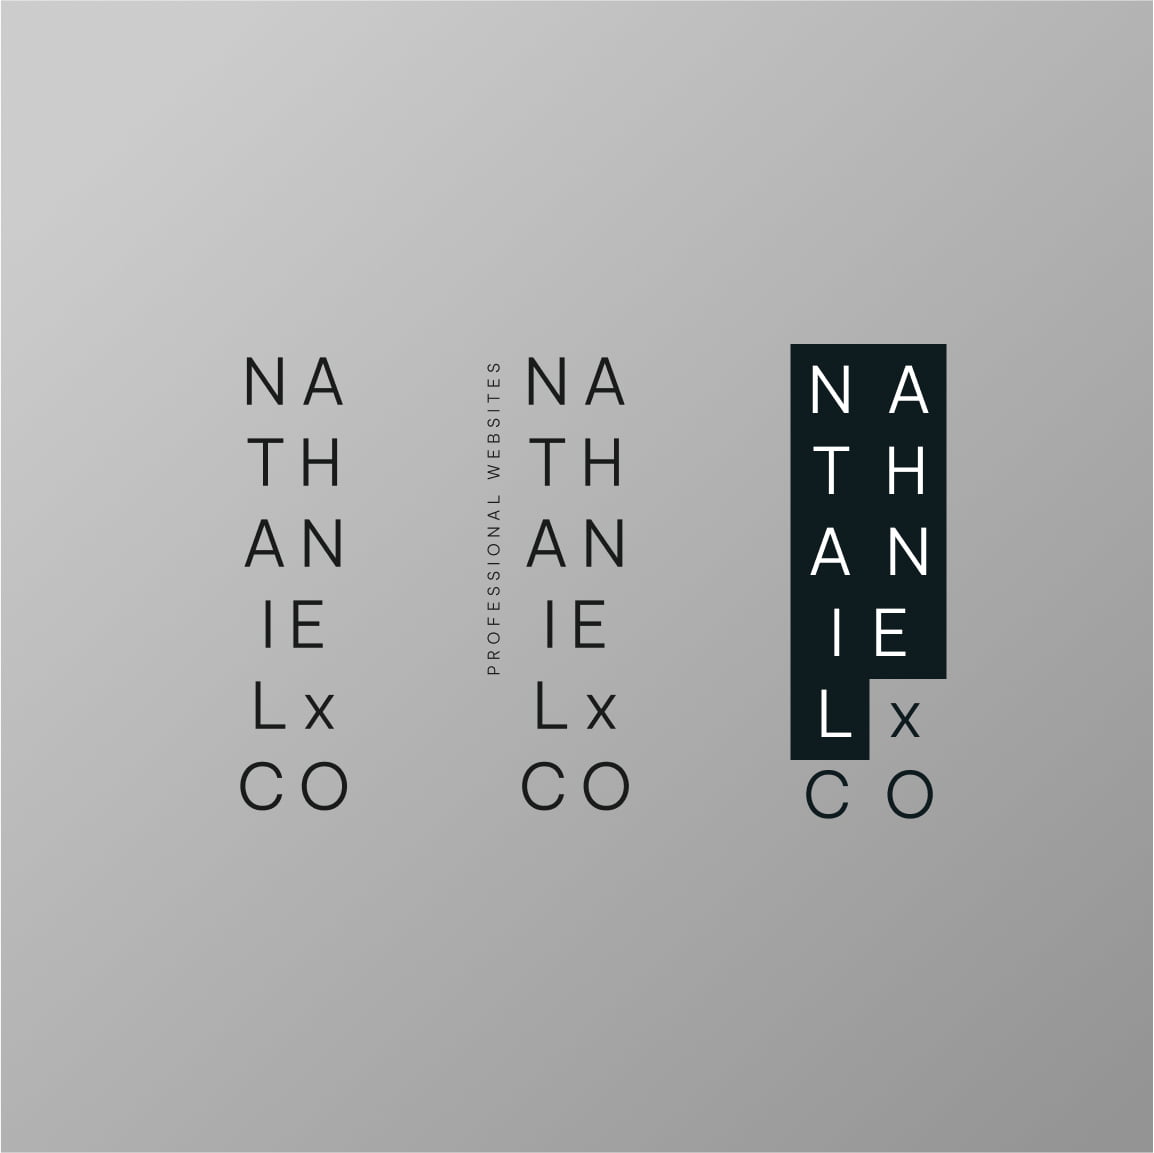 Old concepts of the nathaniel logo